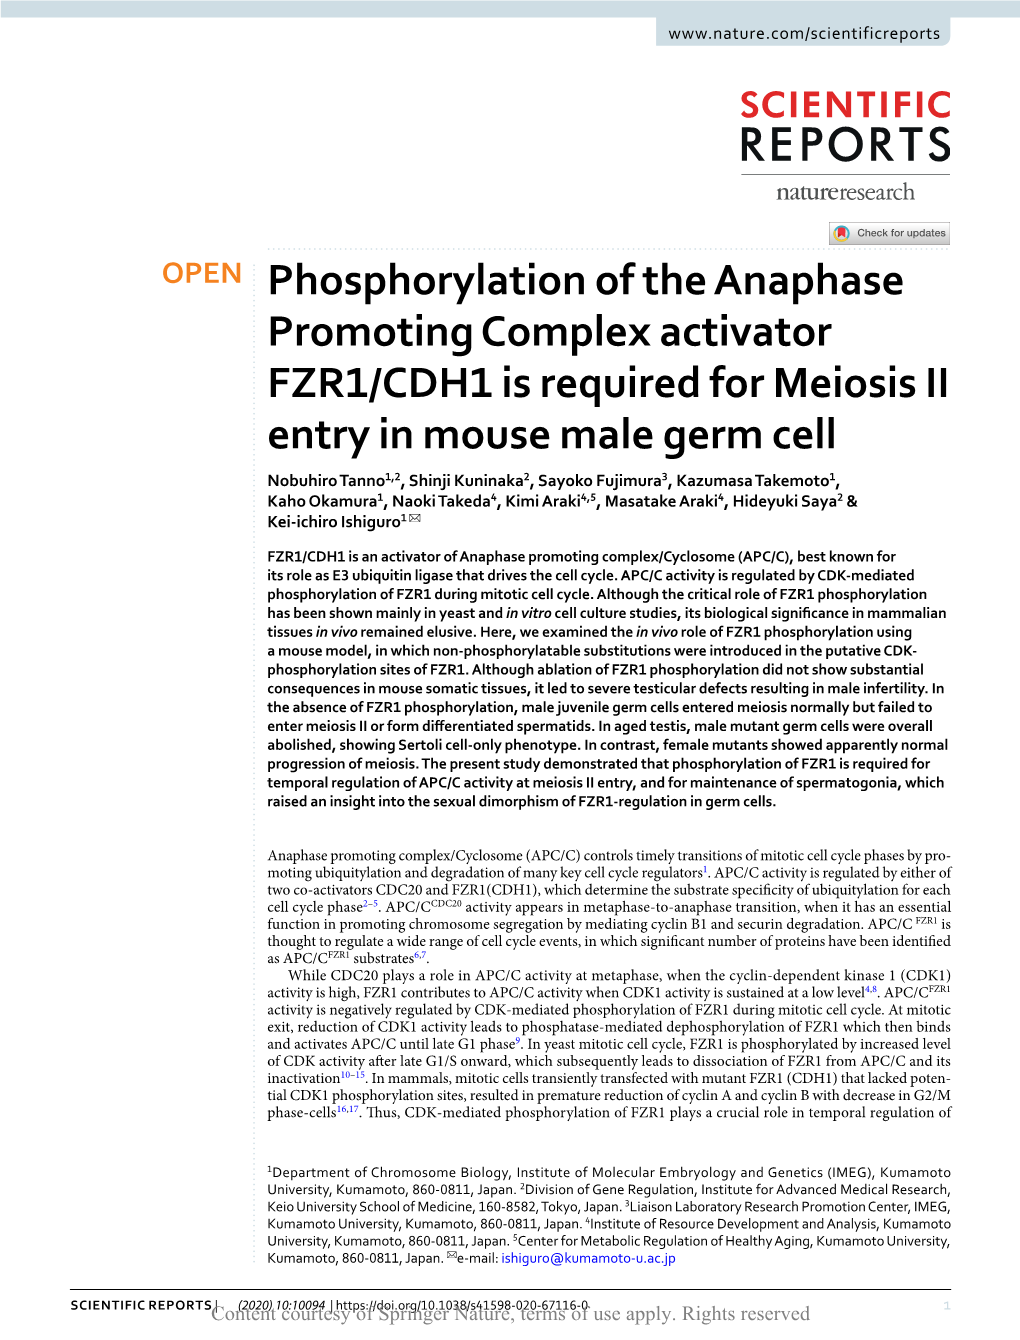 Phosphorylation of the Anaphase Promoting Complex Activator FZR1